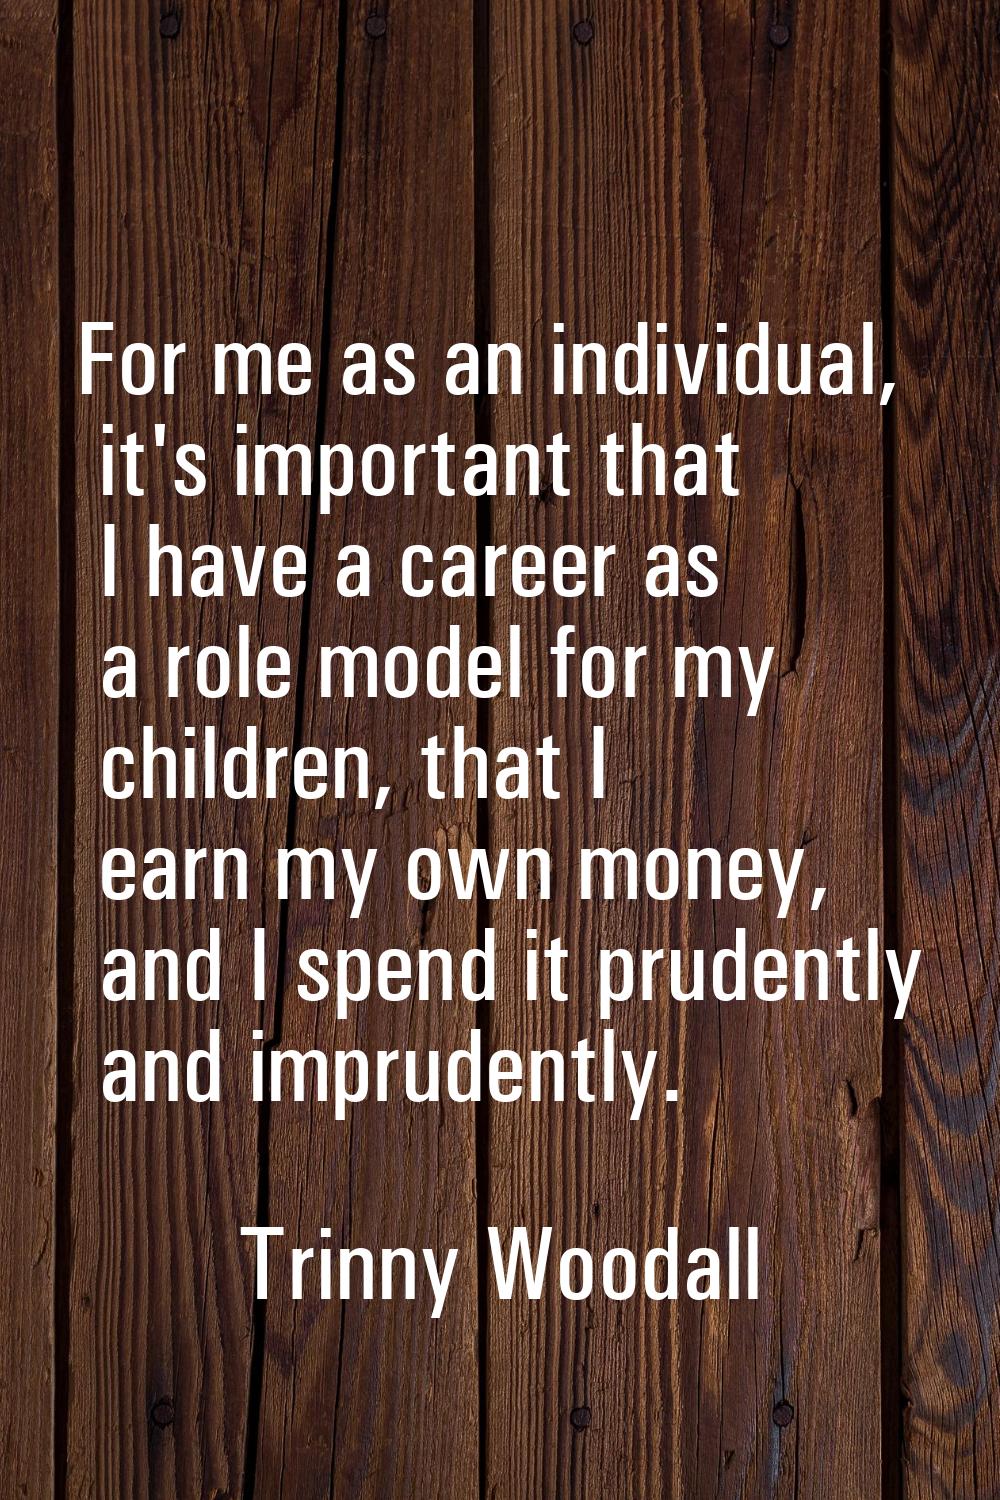 For me as an individual, it's important that I have a career as a role model for my children, that 